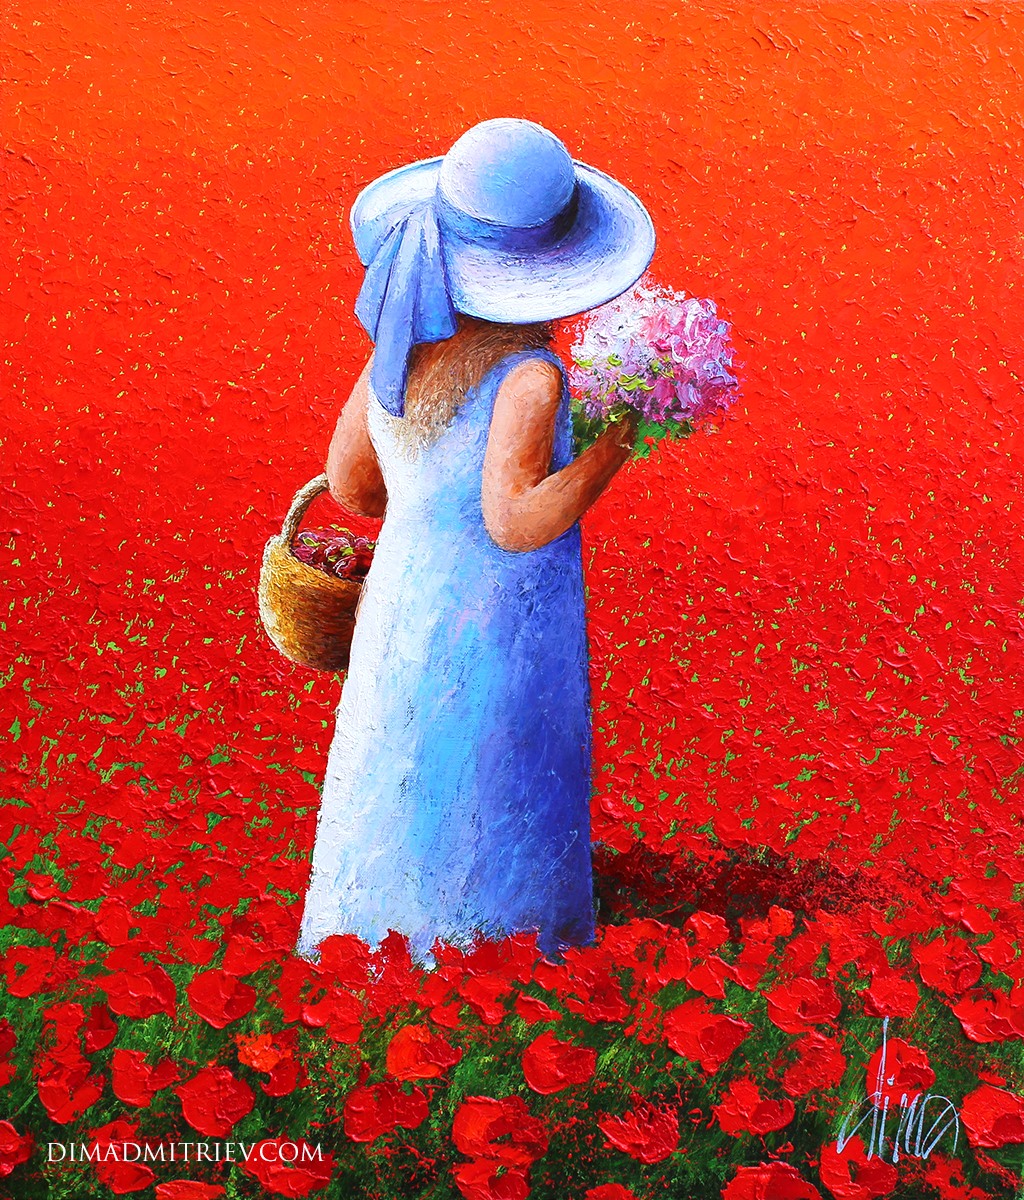 Colorful Paintings By Russian Artist Dima Dmitriev